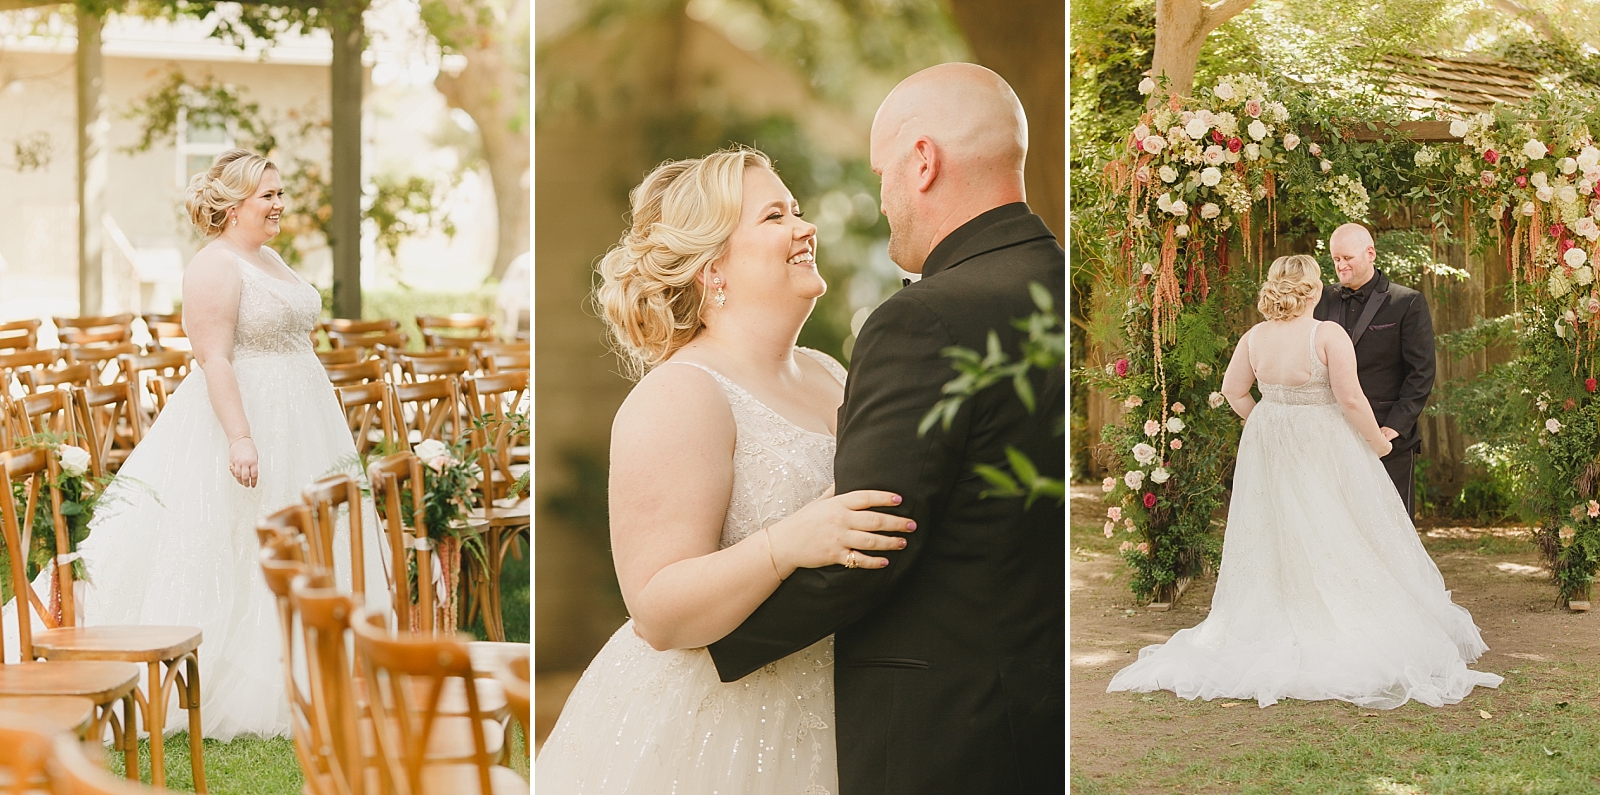 Pageo Lavender Farm wedding couple first look